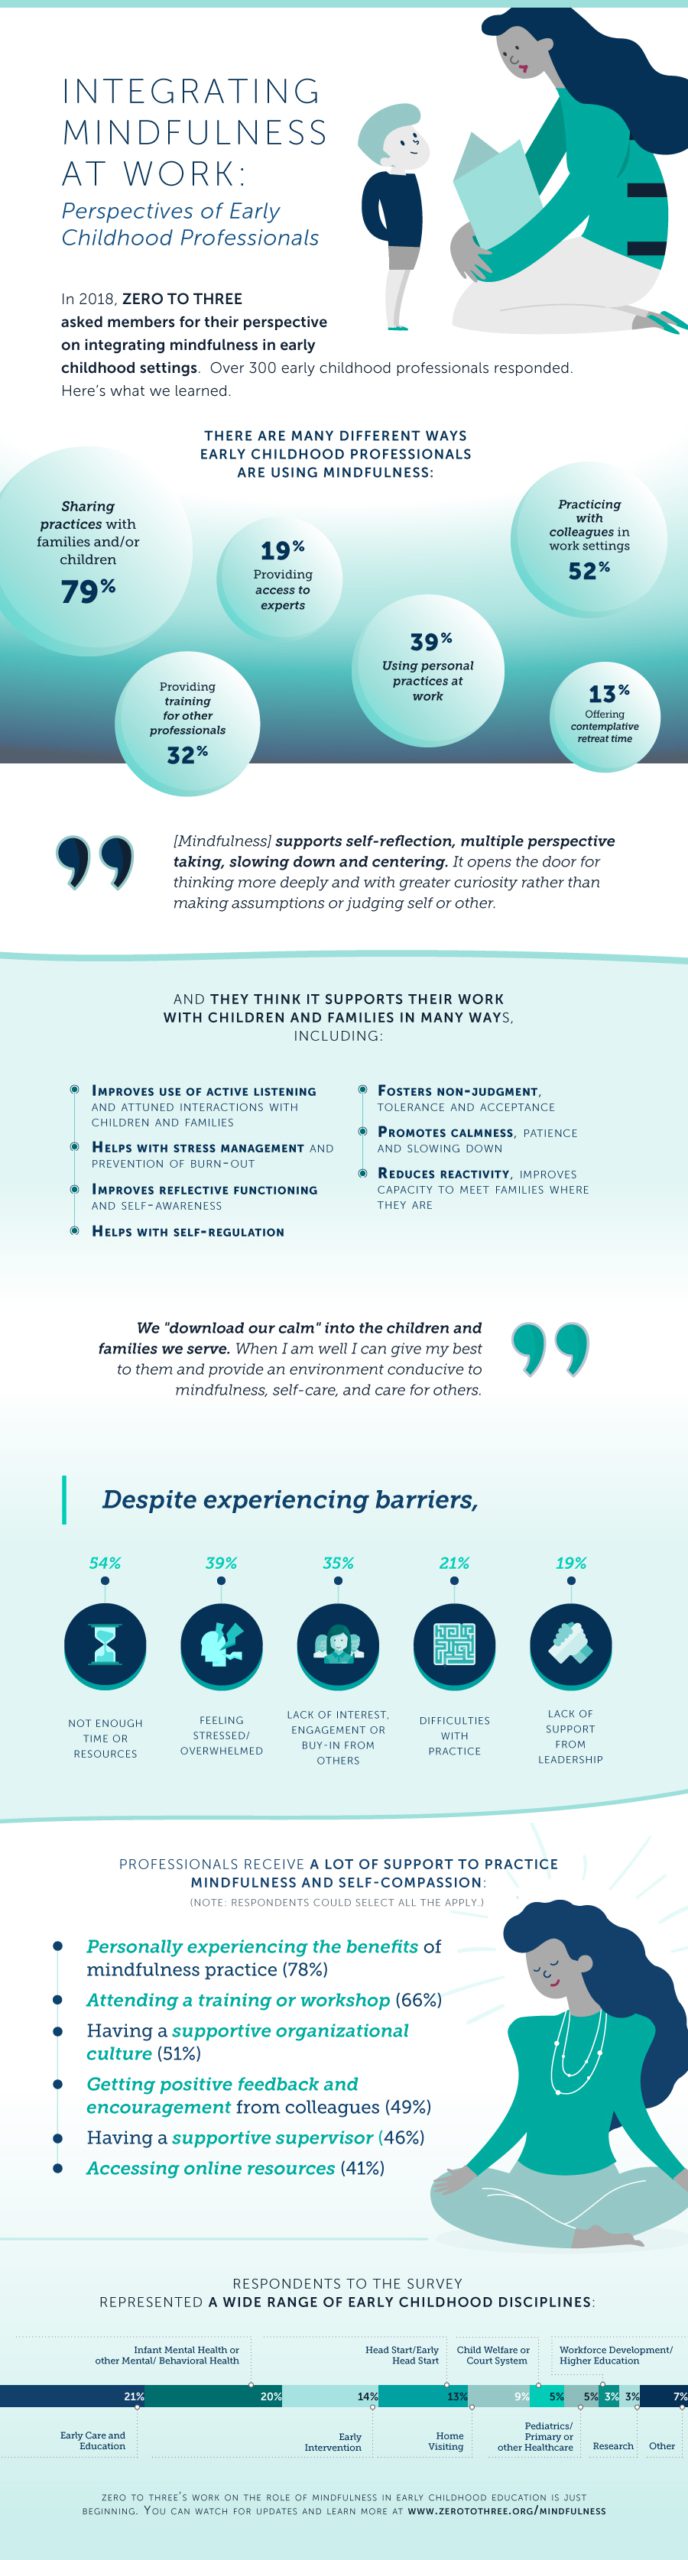 Infographic: Integrating Mindfulness at Work